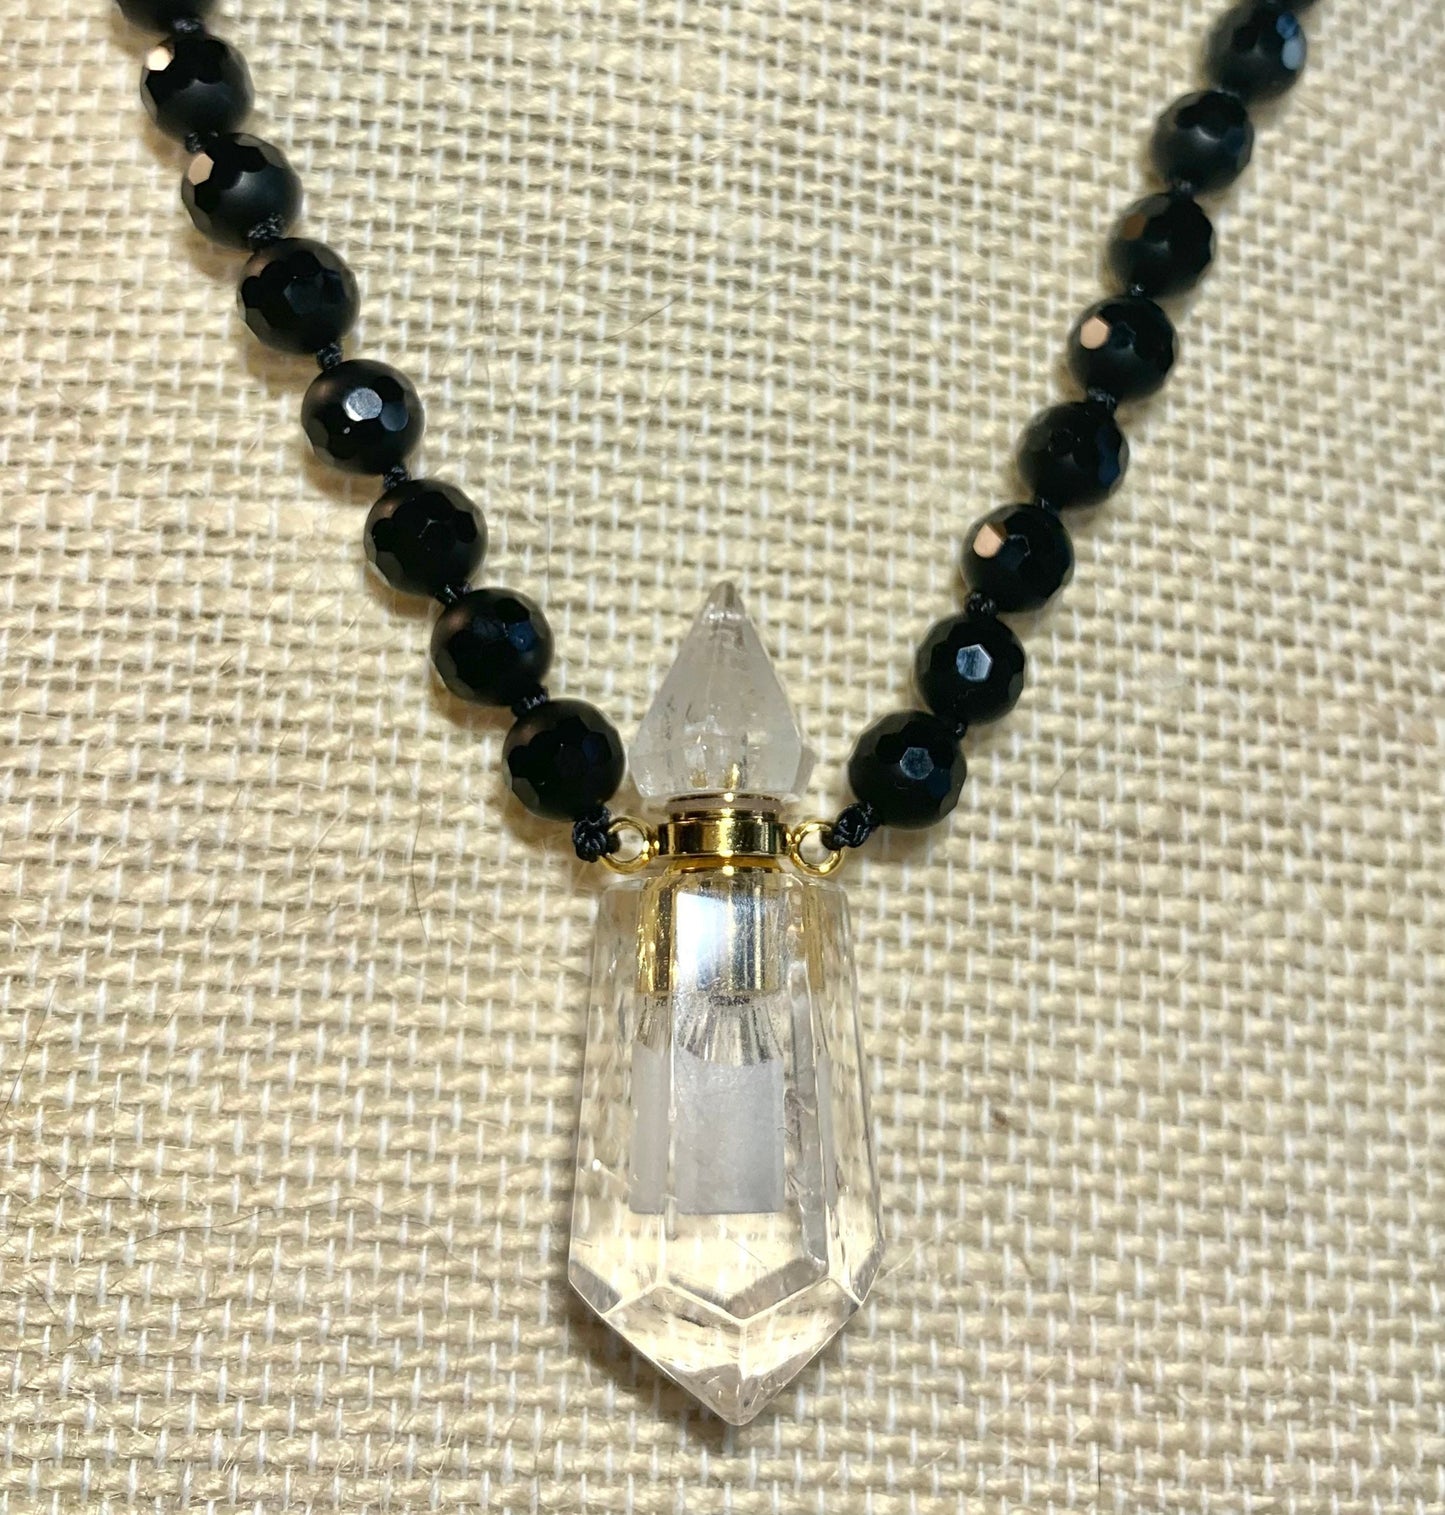 Mala Beads for Strength and Support, Black Onyx with a Quartz Miniature Perfume Bottle Pendant